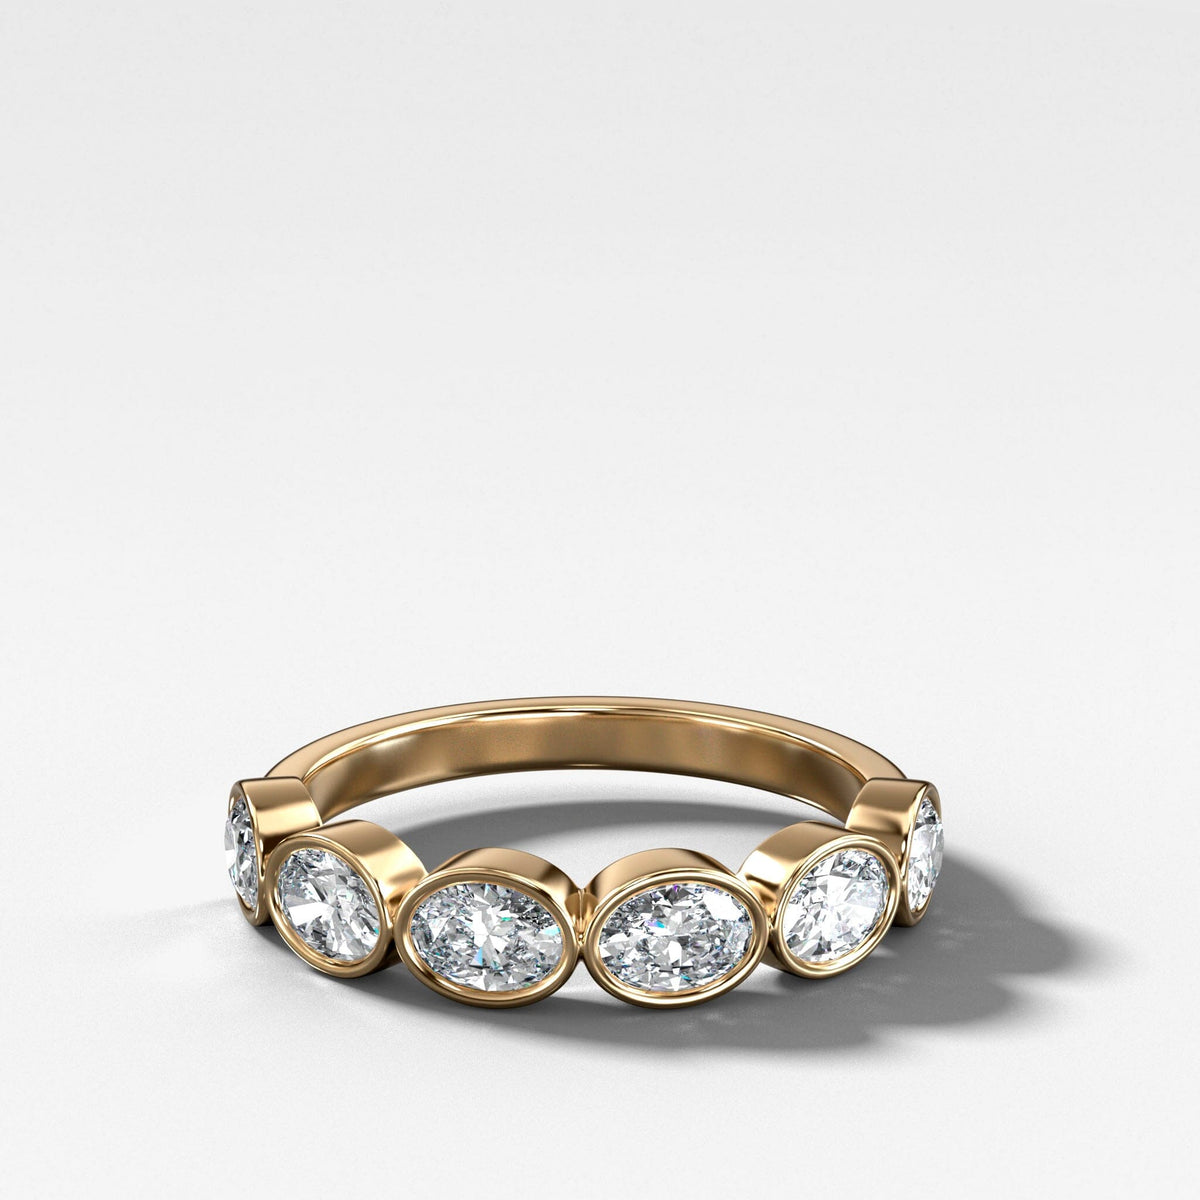 Midi Bezel Set Halfway Wedding Band With East West Oval Cuts Band Good Stone Inc Yellow Gold 14k Natural